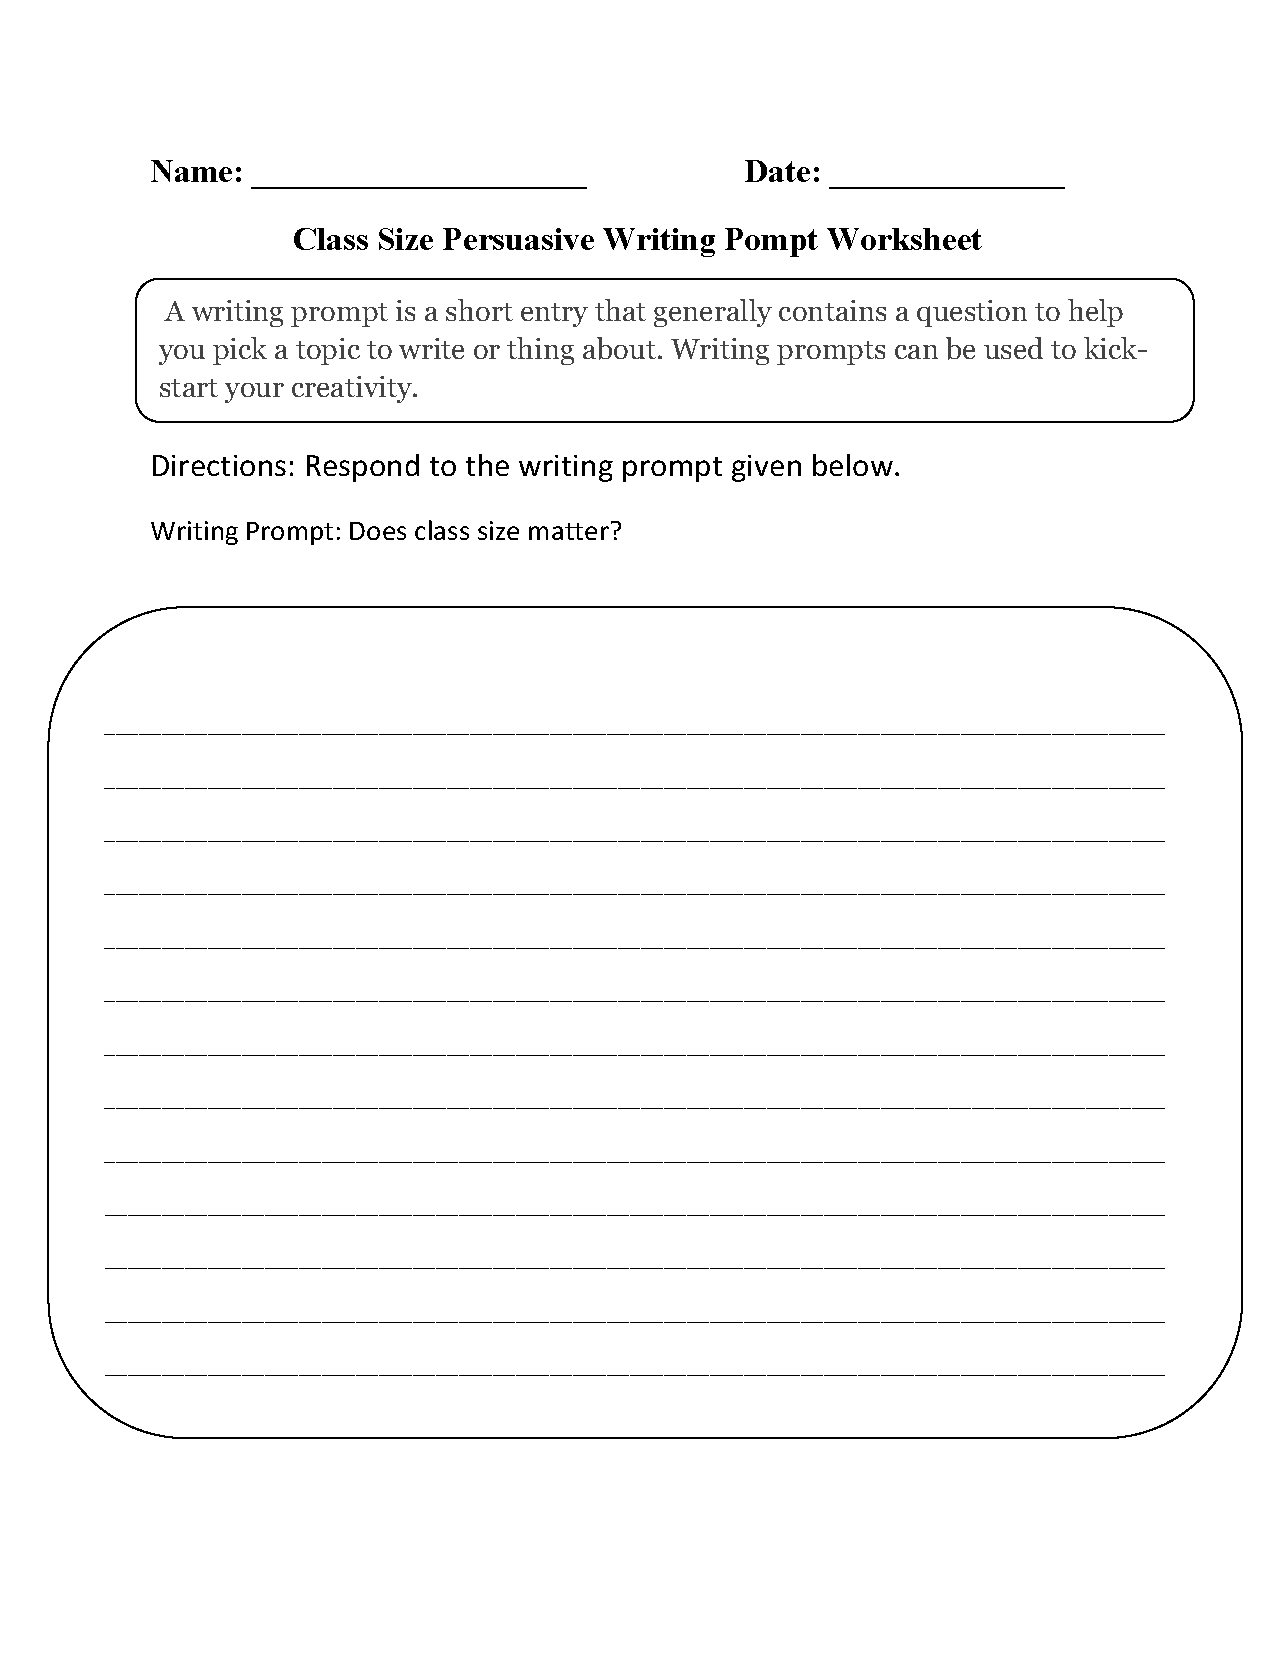 Class Size Persuasive Writing Prompt Worksheets